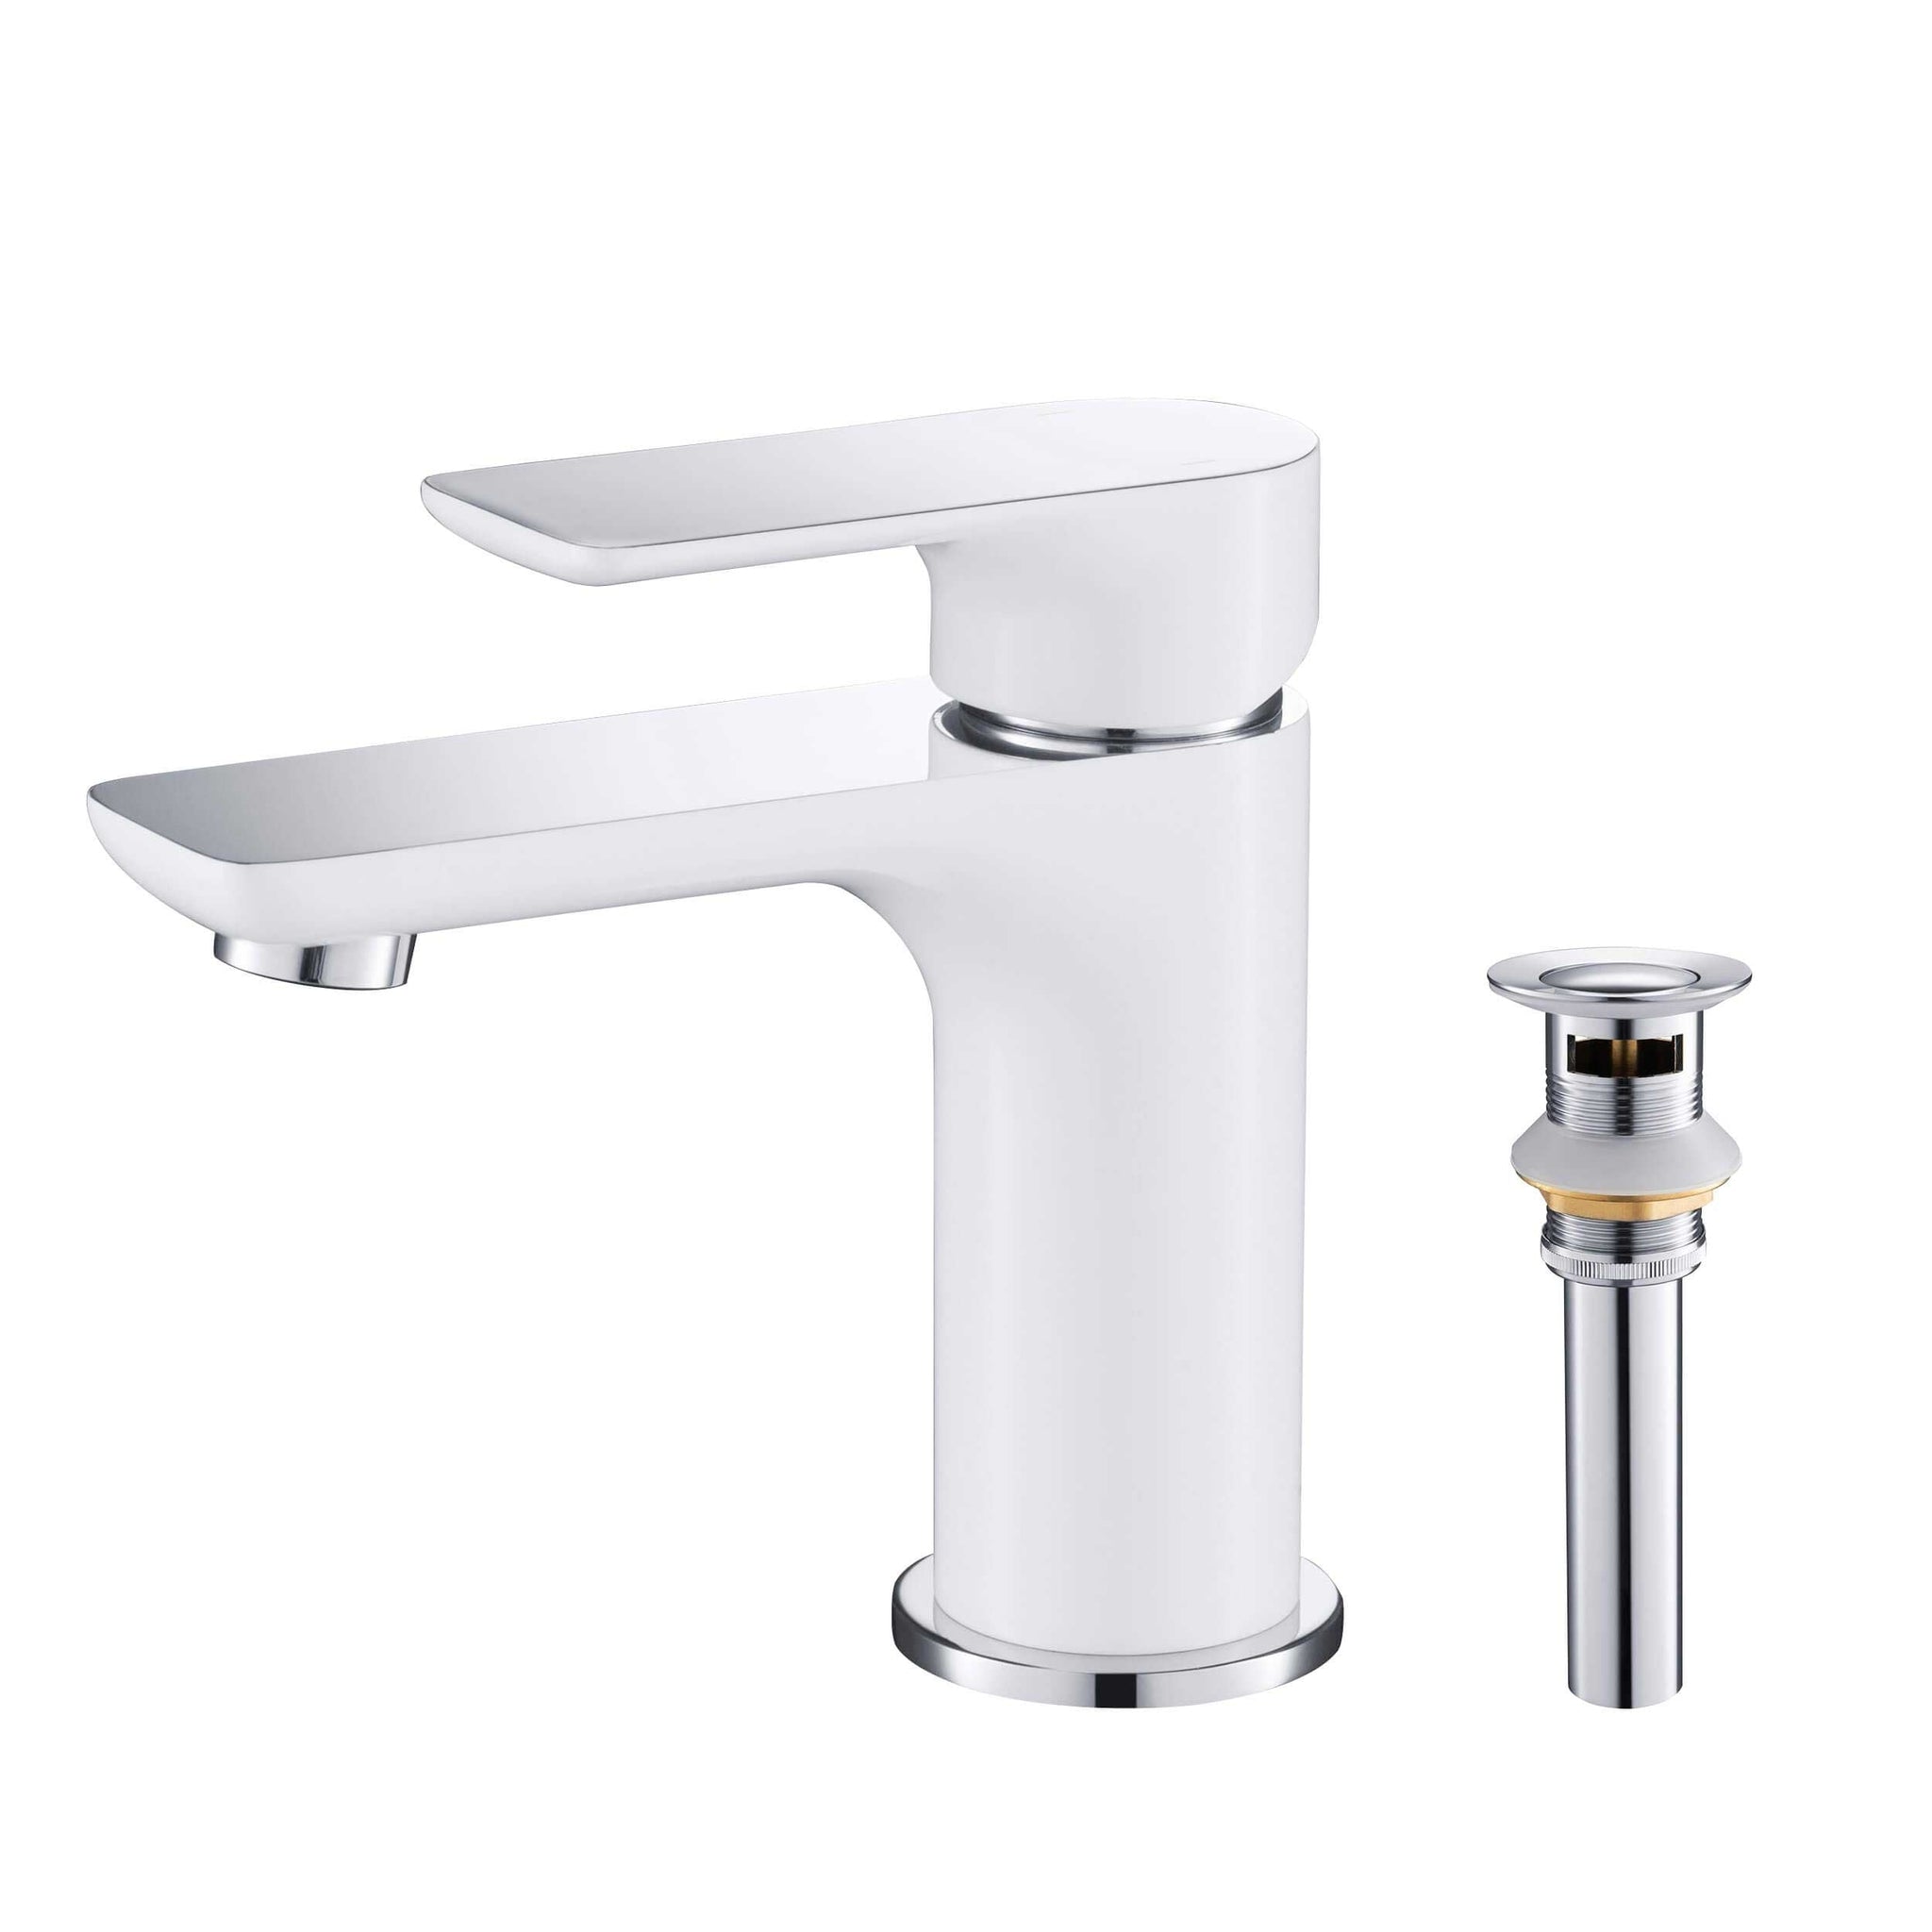 KIBI, KIBI Tender Single Handle White Solid Brass Bathroom Sink Faucet With Chrome Pop-Up Drain Stopper Small Cover With Overflow